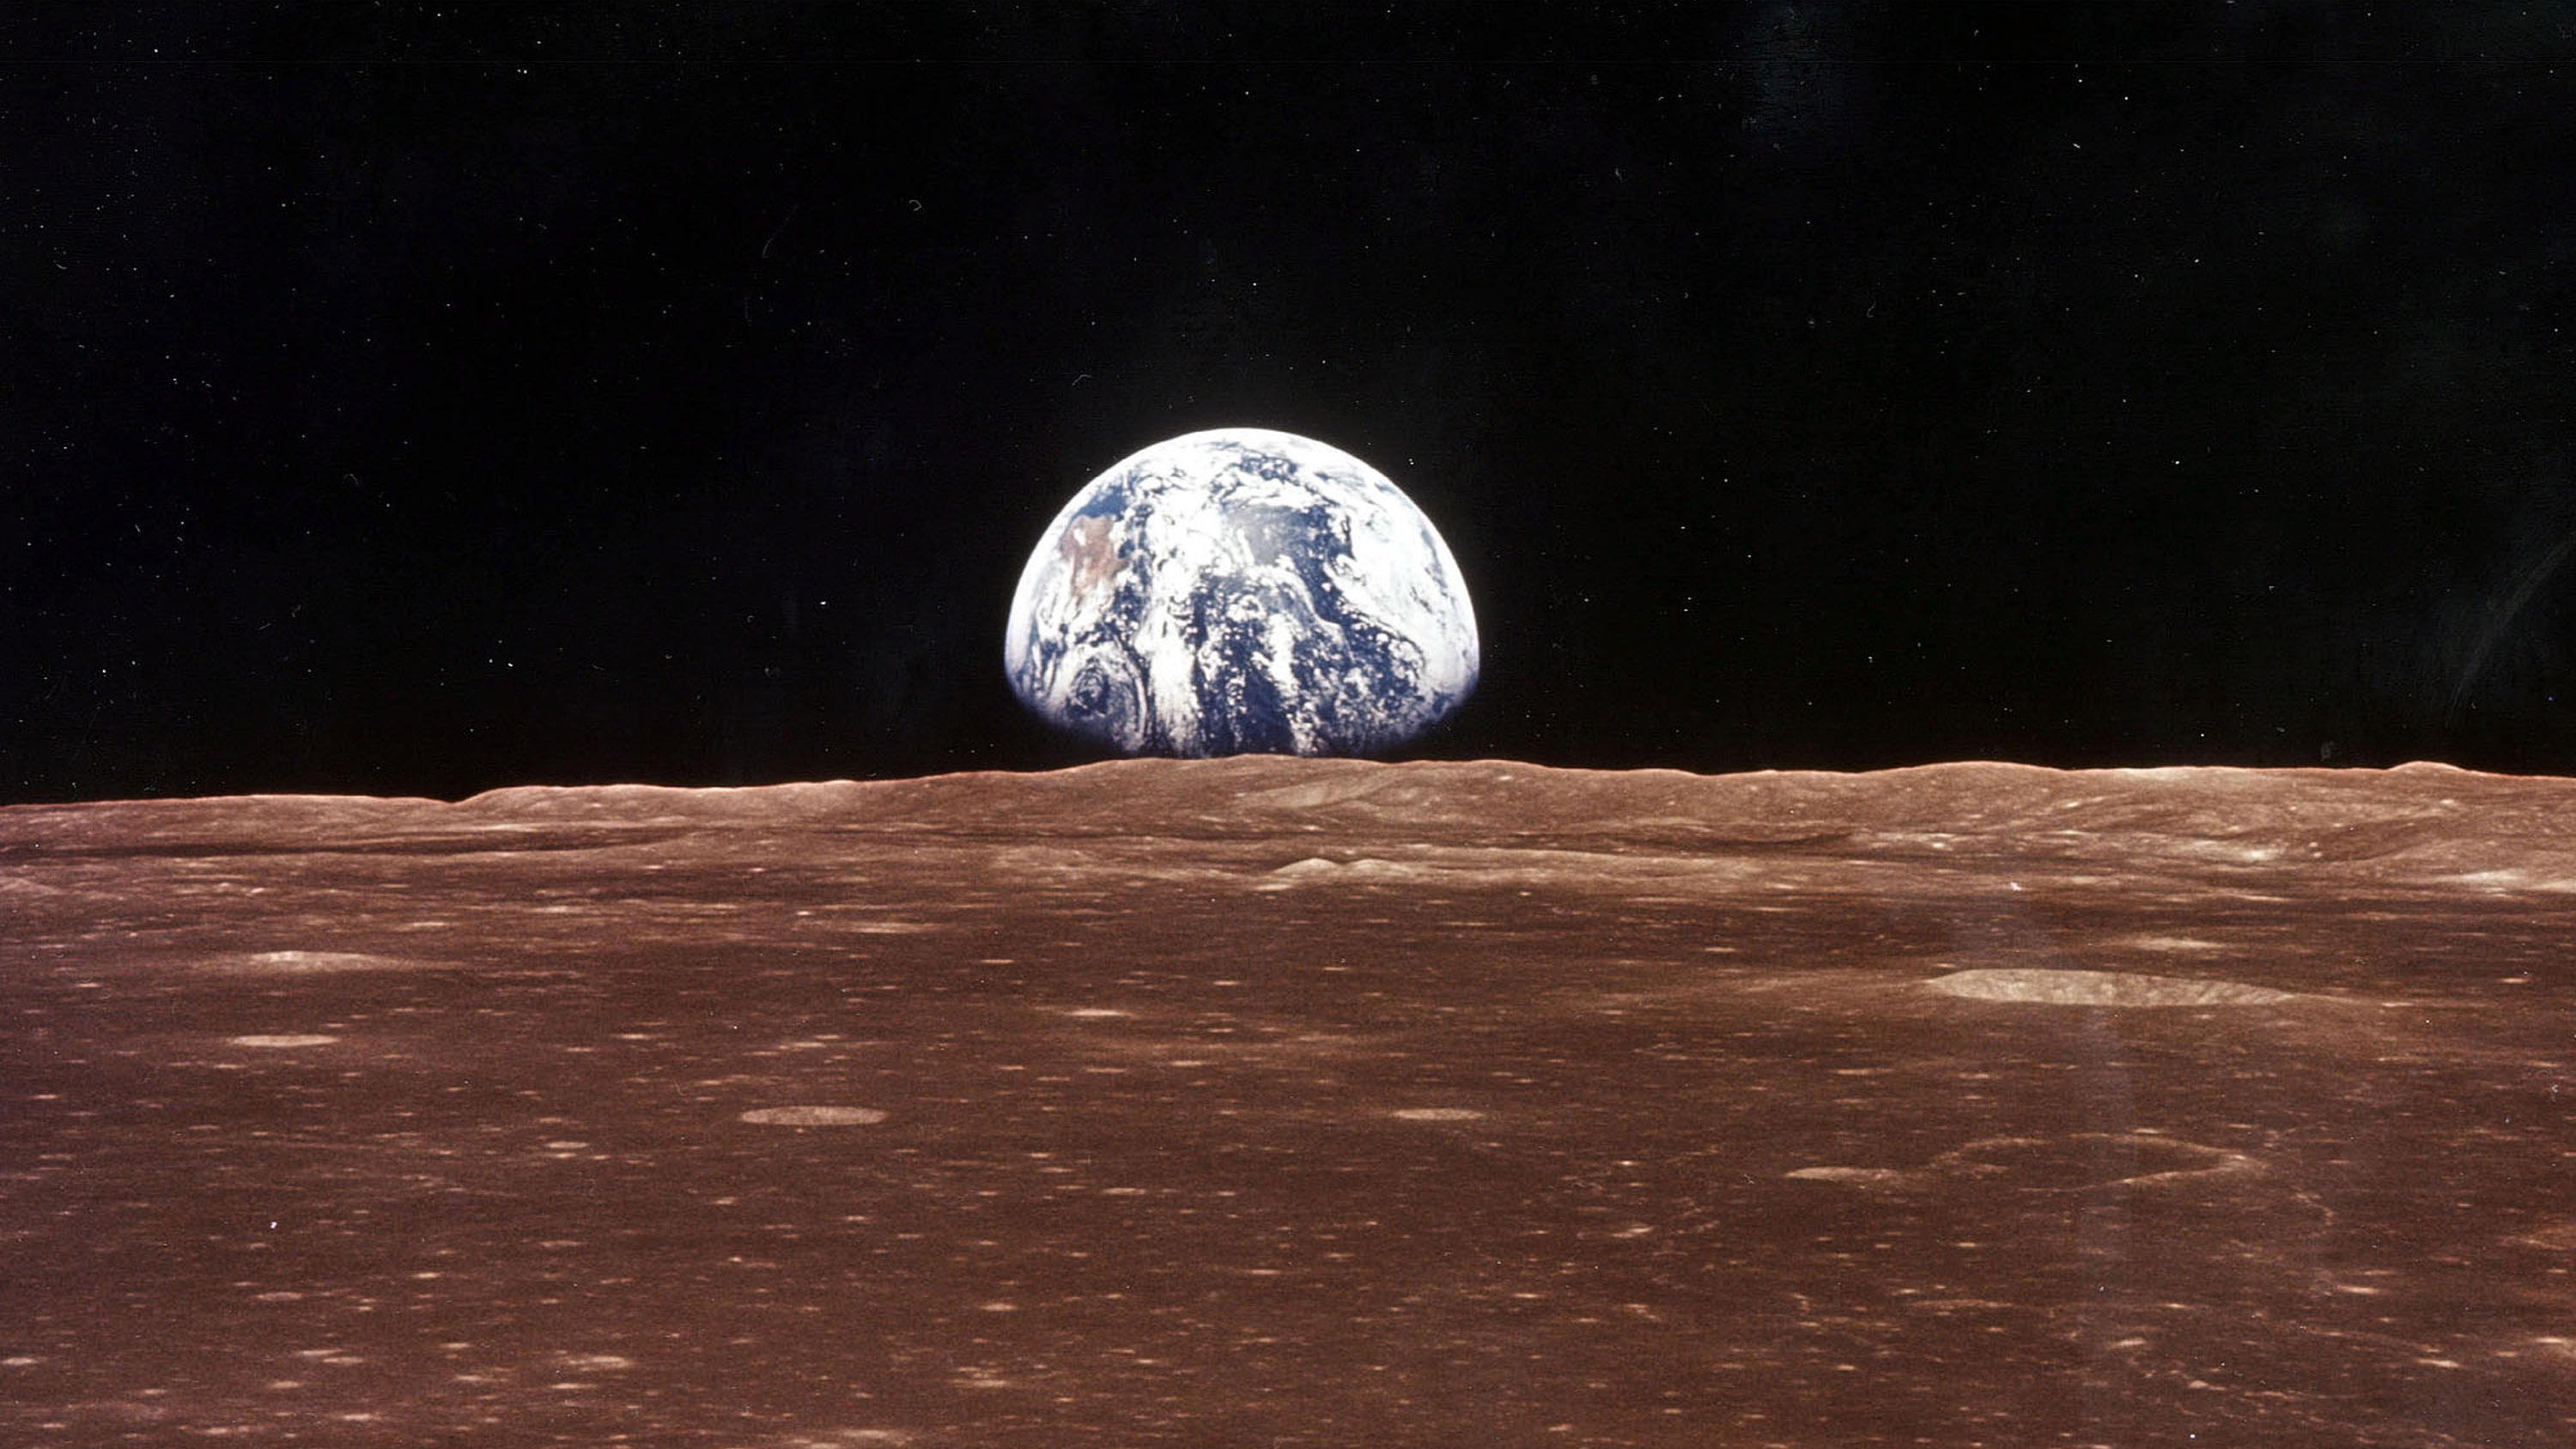 The Moon is inside Earth's atmosphere, European researchers say - Big Think